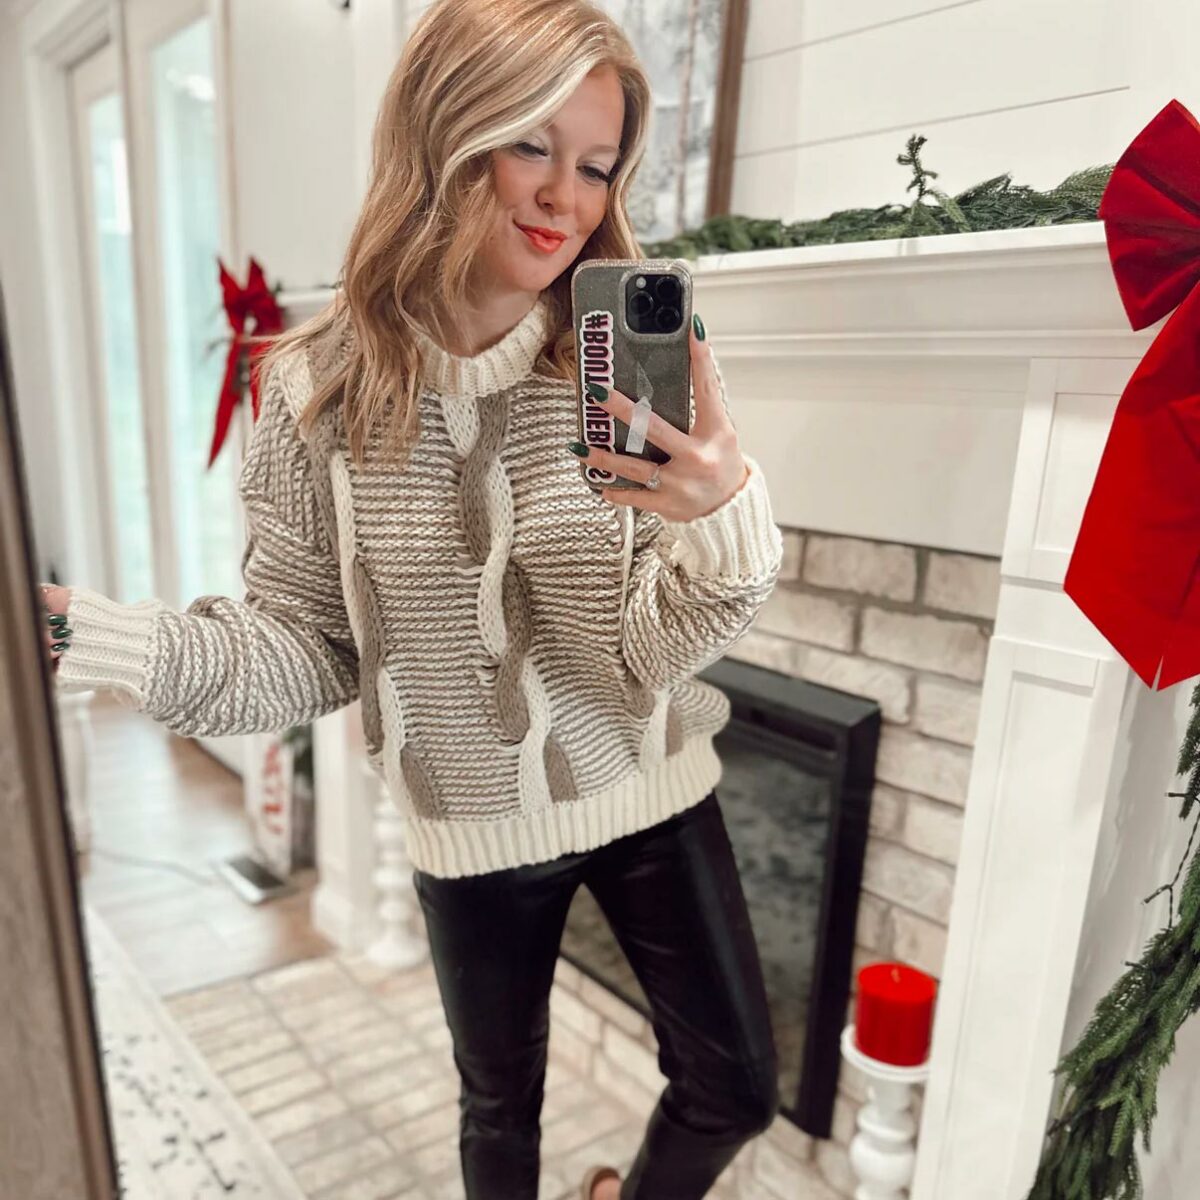 Woman taking selfie with a fashion sweater